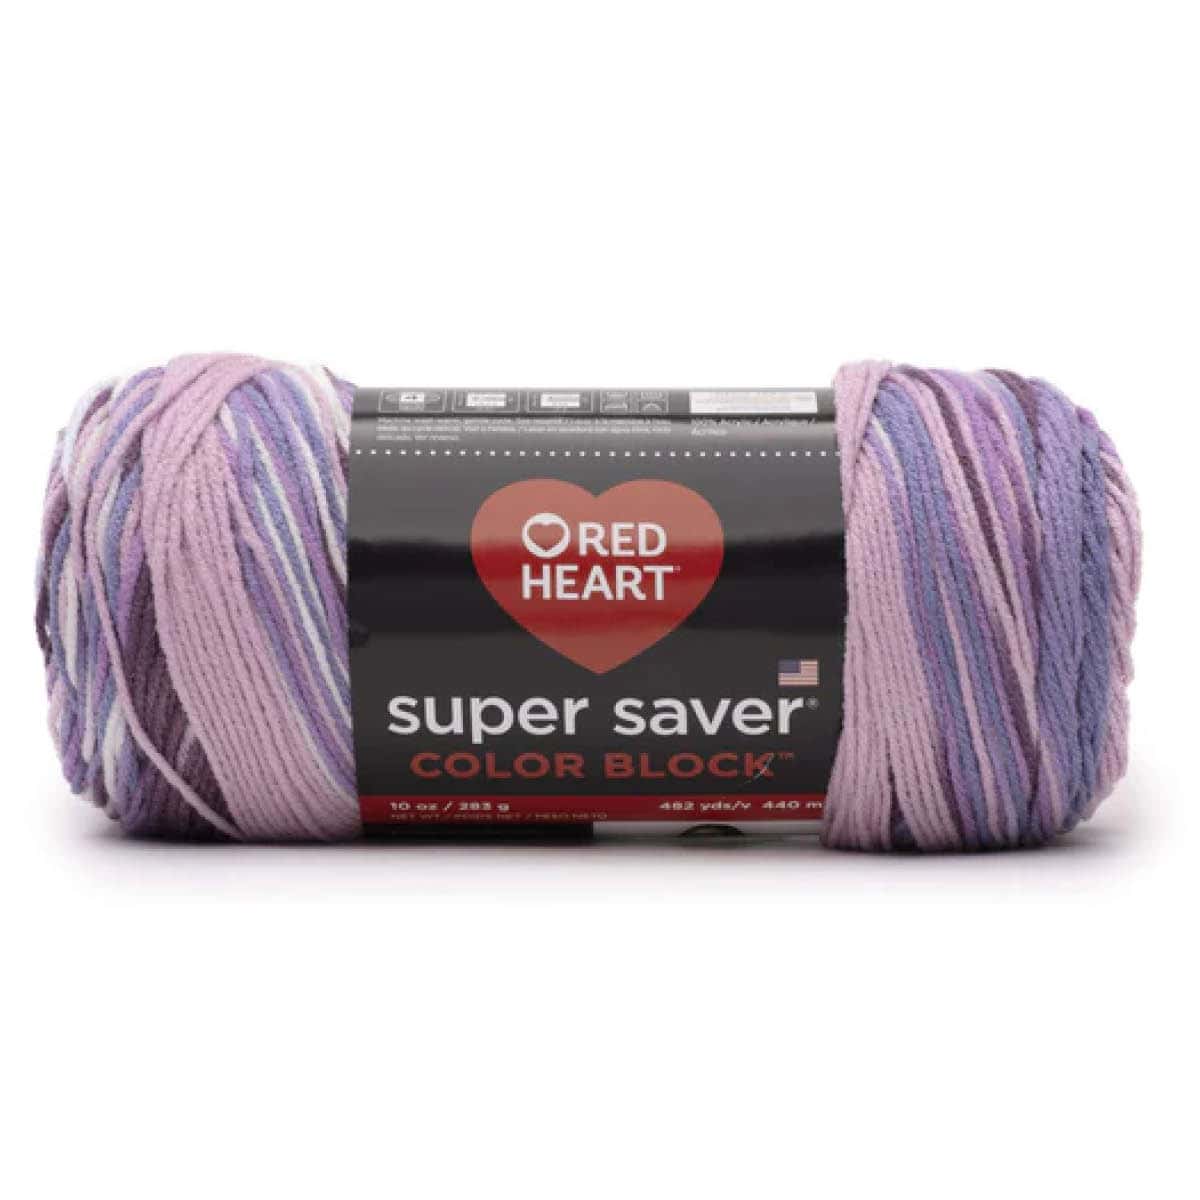 Red Heart Super Saver Colorblock Yarn Product